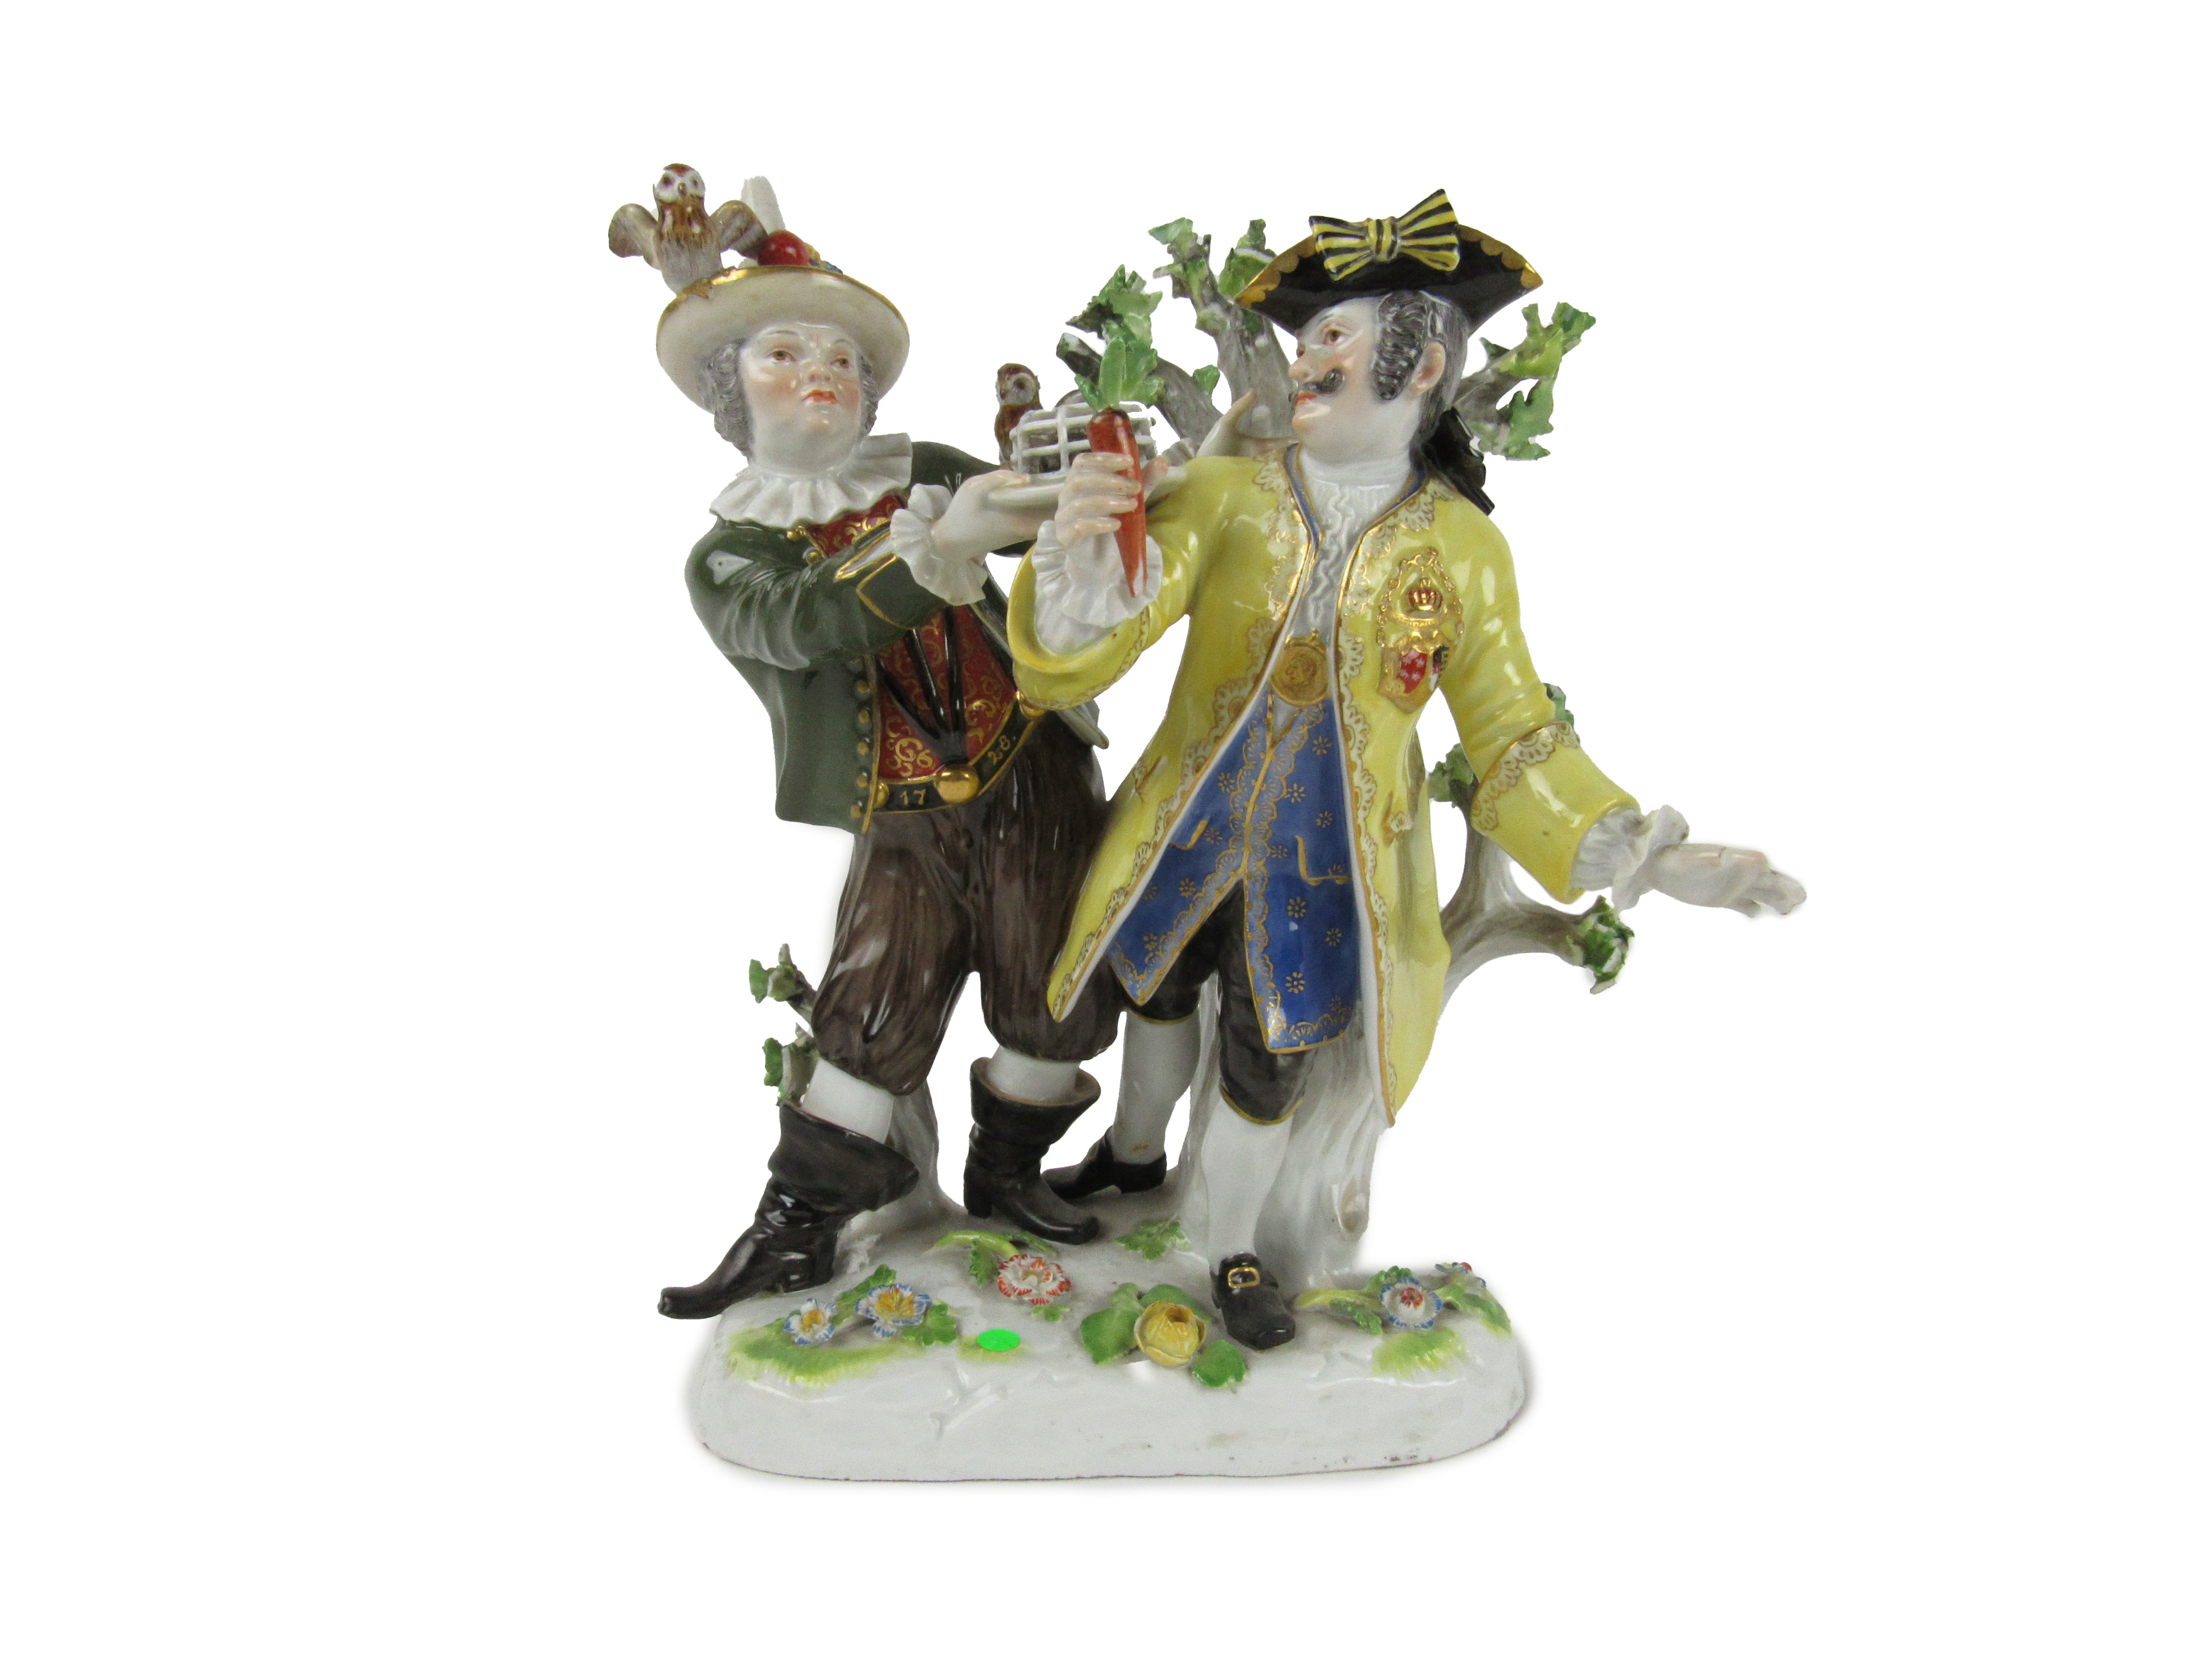 A large Meissen Group, with gentleman in bright yellow coat, and a Jester in green coat, offering